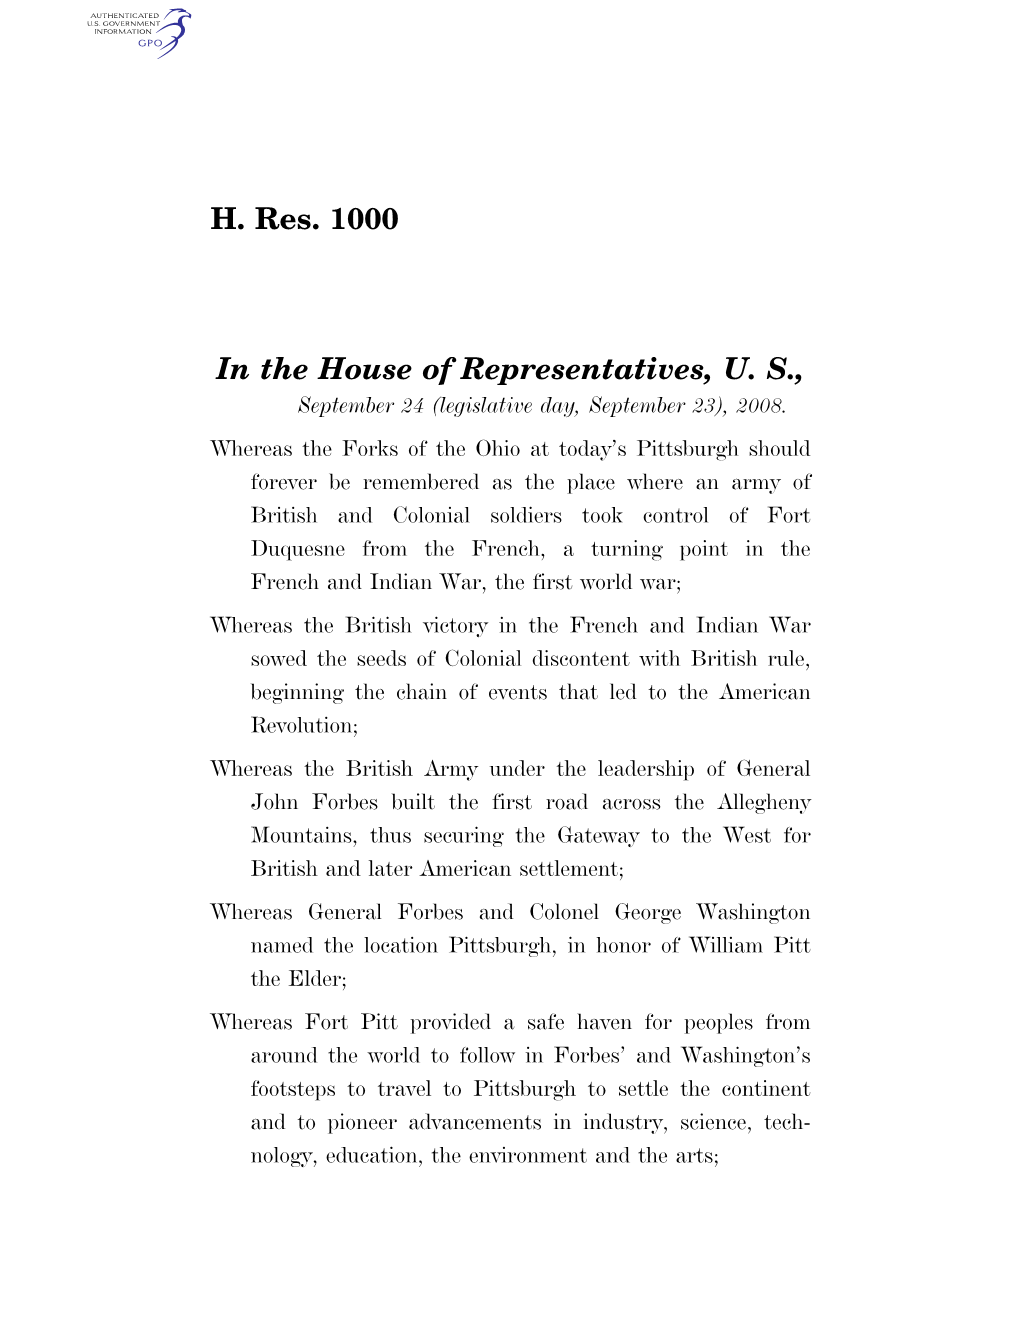 H. Res. 1000 in the House of Representatives, U